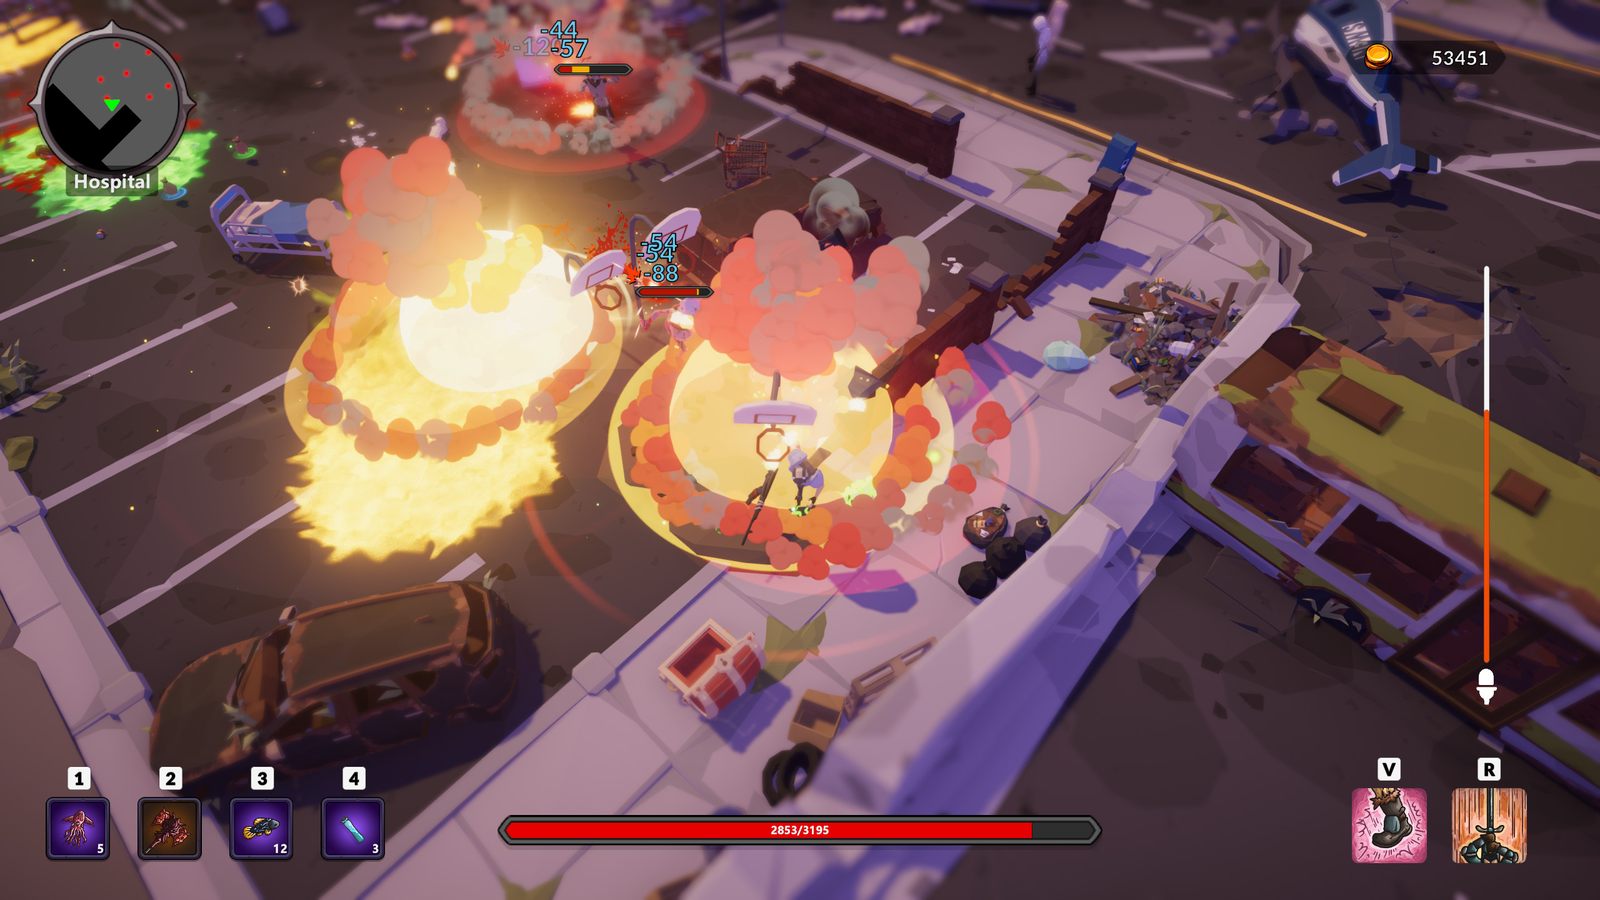 Launching NUKES At EXPLOSIVE ZOMBIES in People Playground 